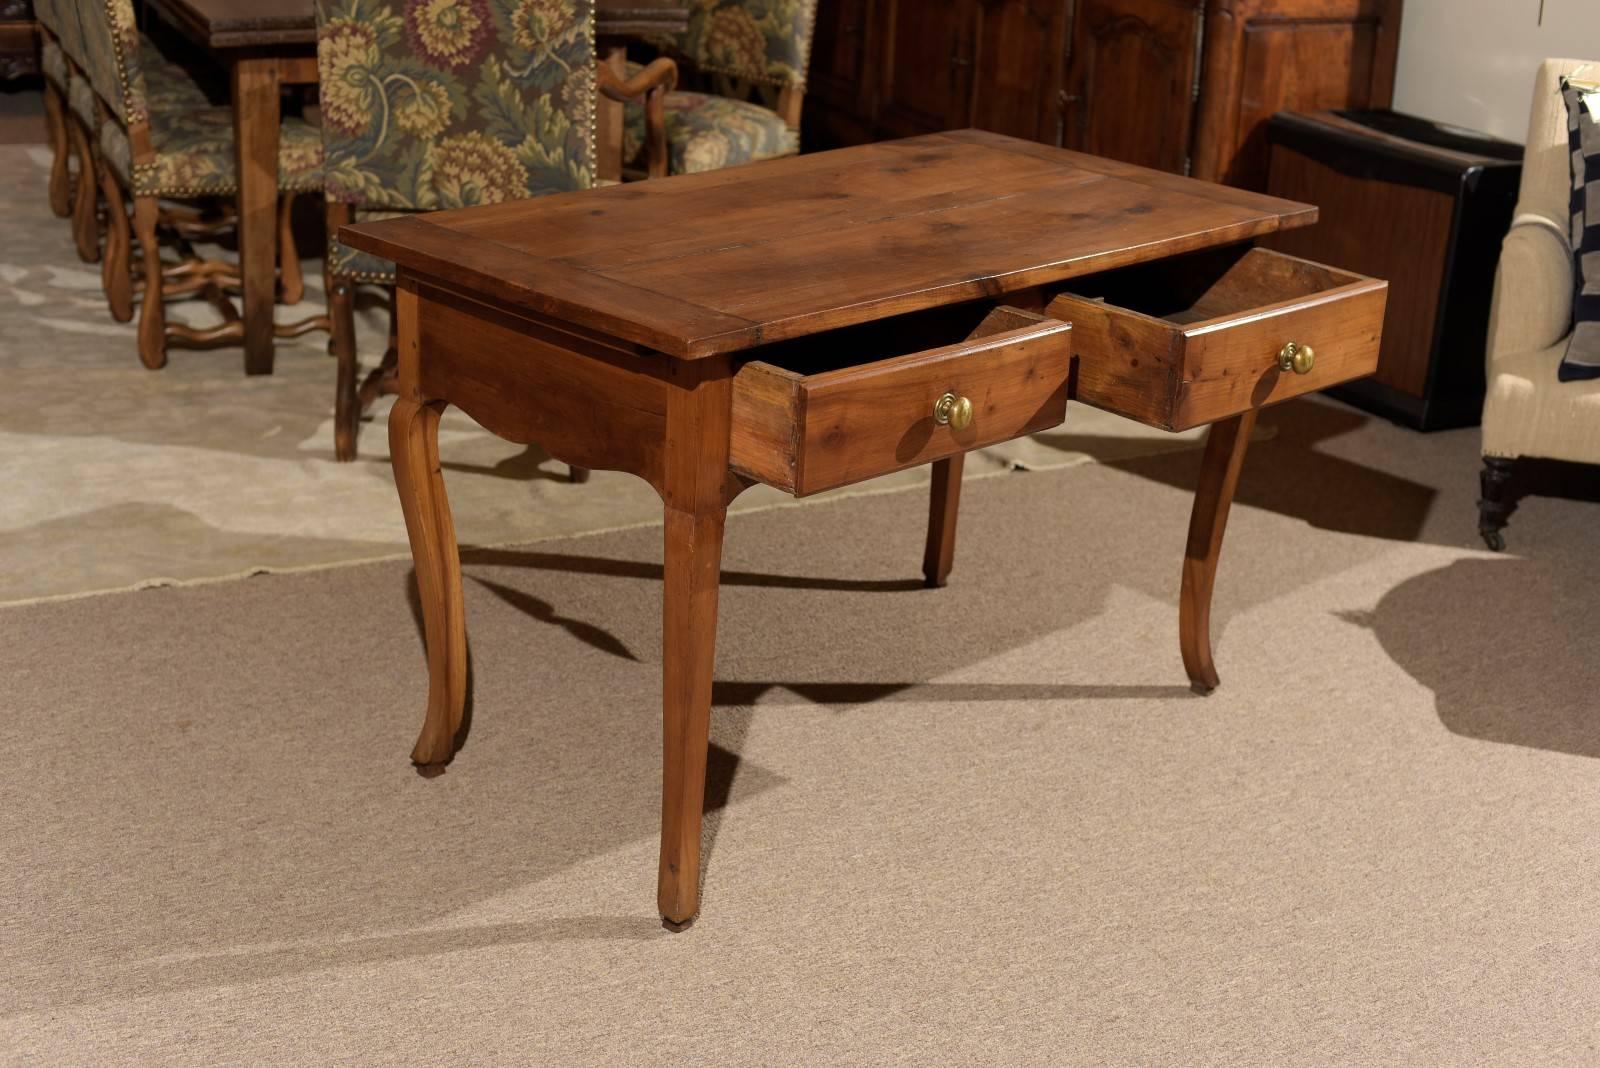 19th Century Cherry Louis XV Style Table with Two Drawers, circa 1820 In Excellent Condition For Sale In Atlanta, GA